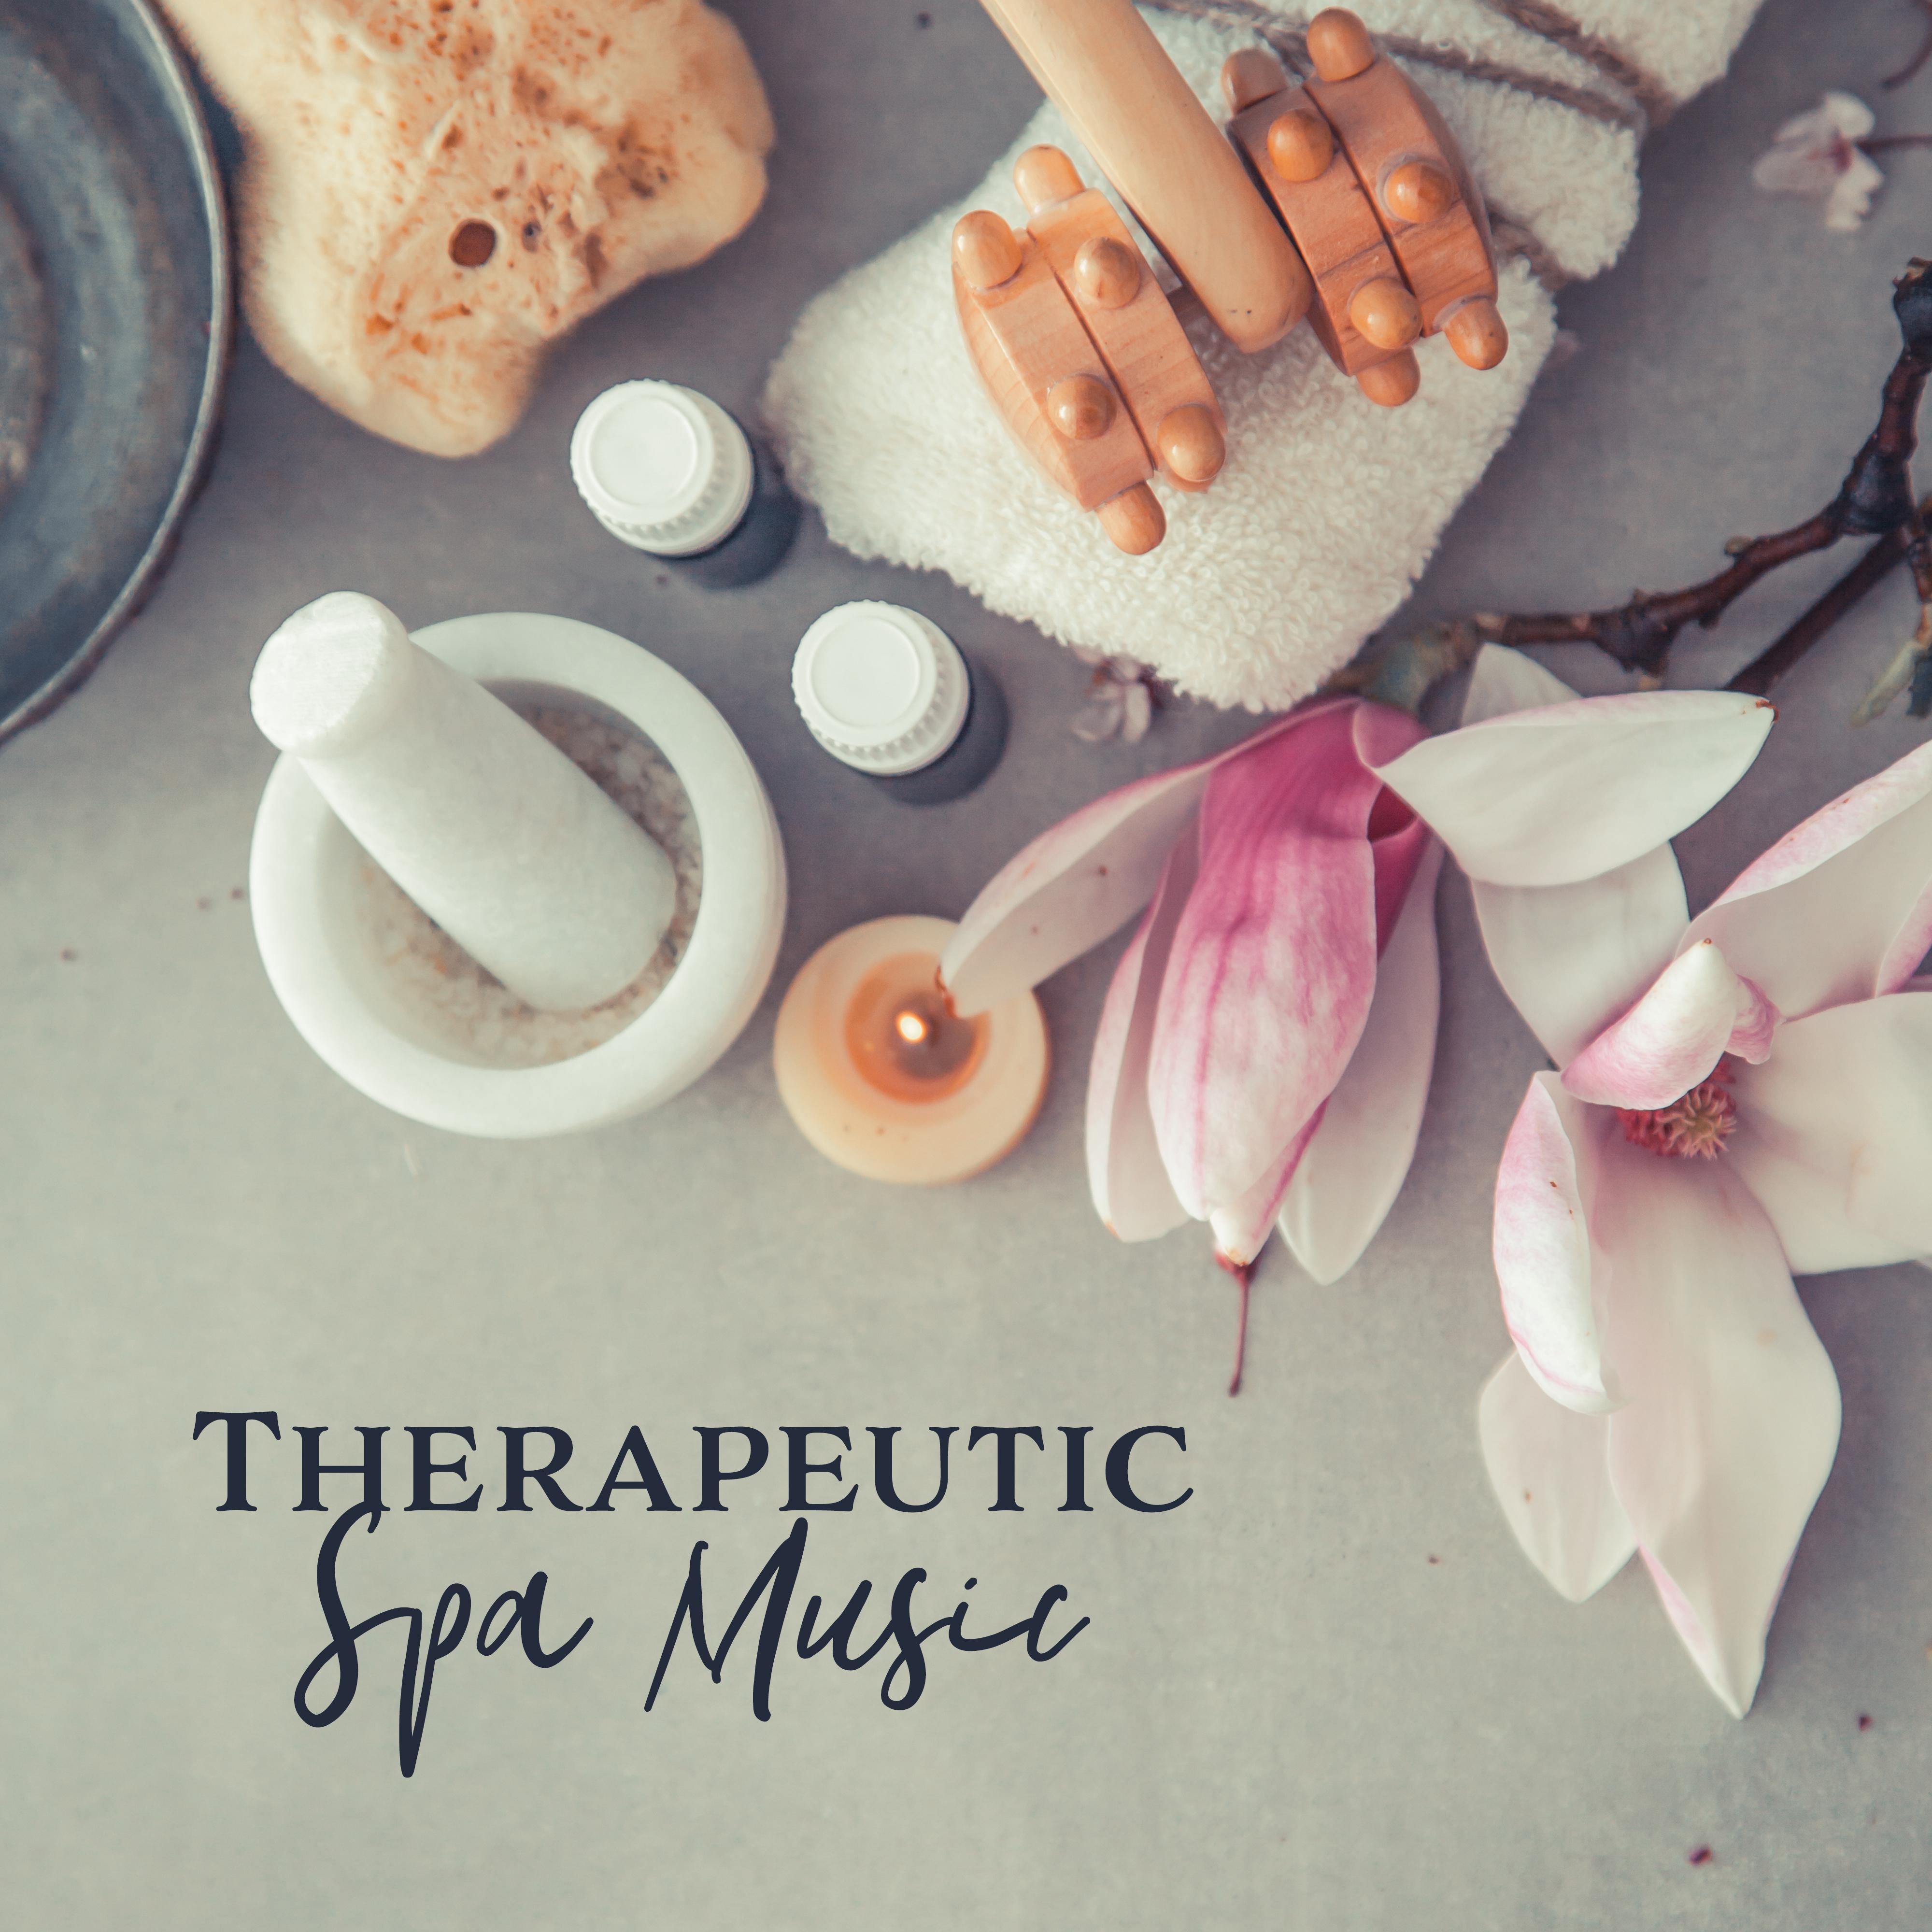 Therapeutic Spa Music - Soothing Music for Relaxation, Massage, Stress, Insomnia, Tension, Anxiety and Pain